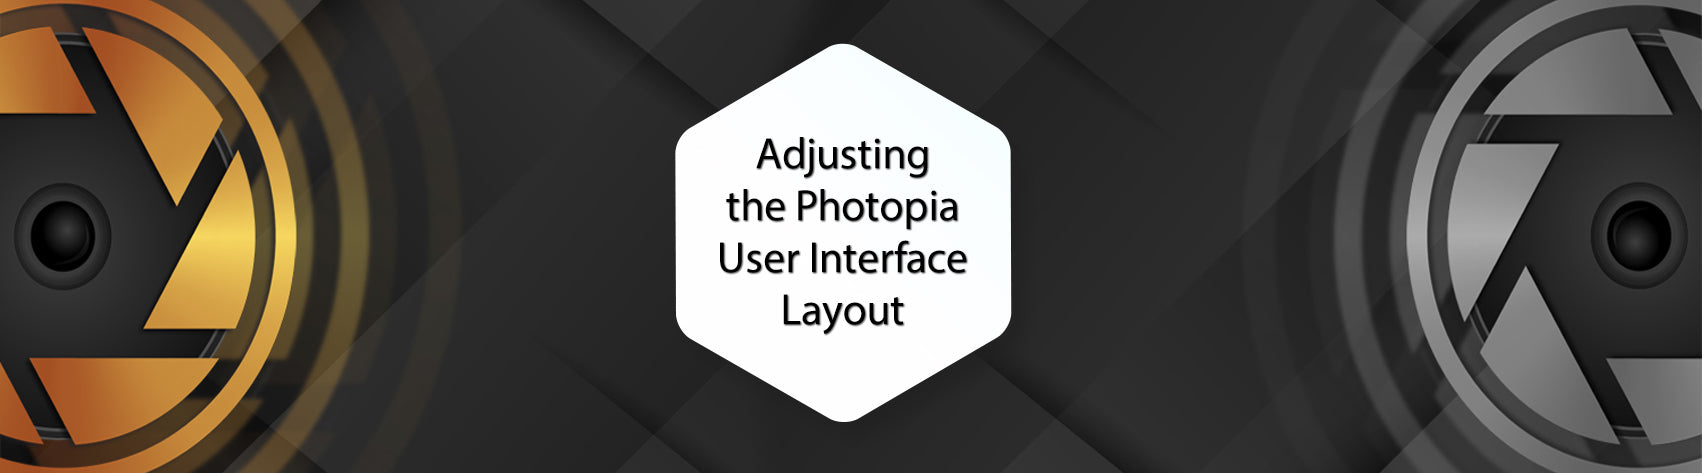 Adjusting the Photopia User Interface